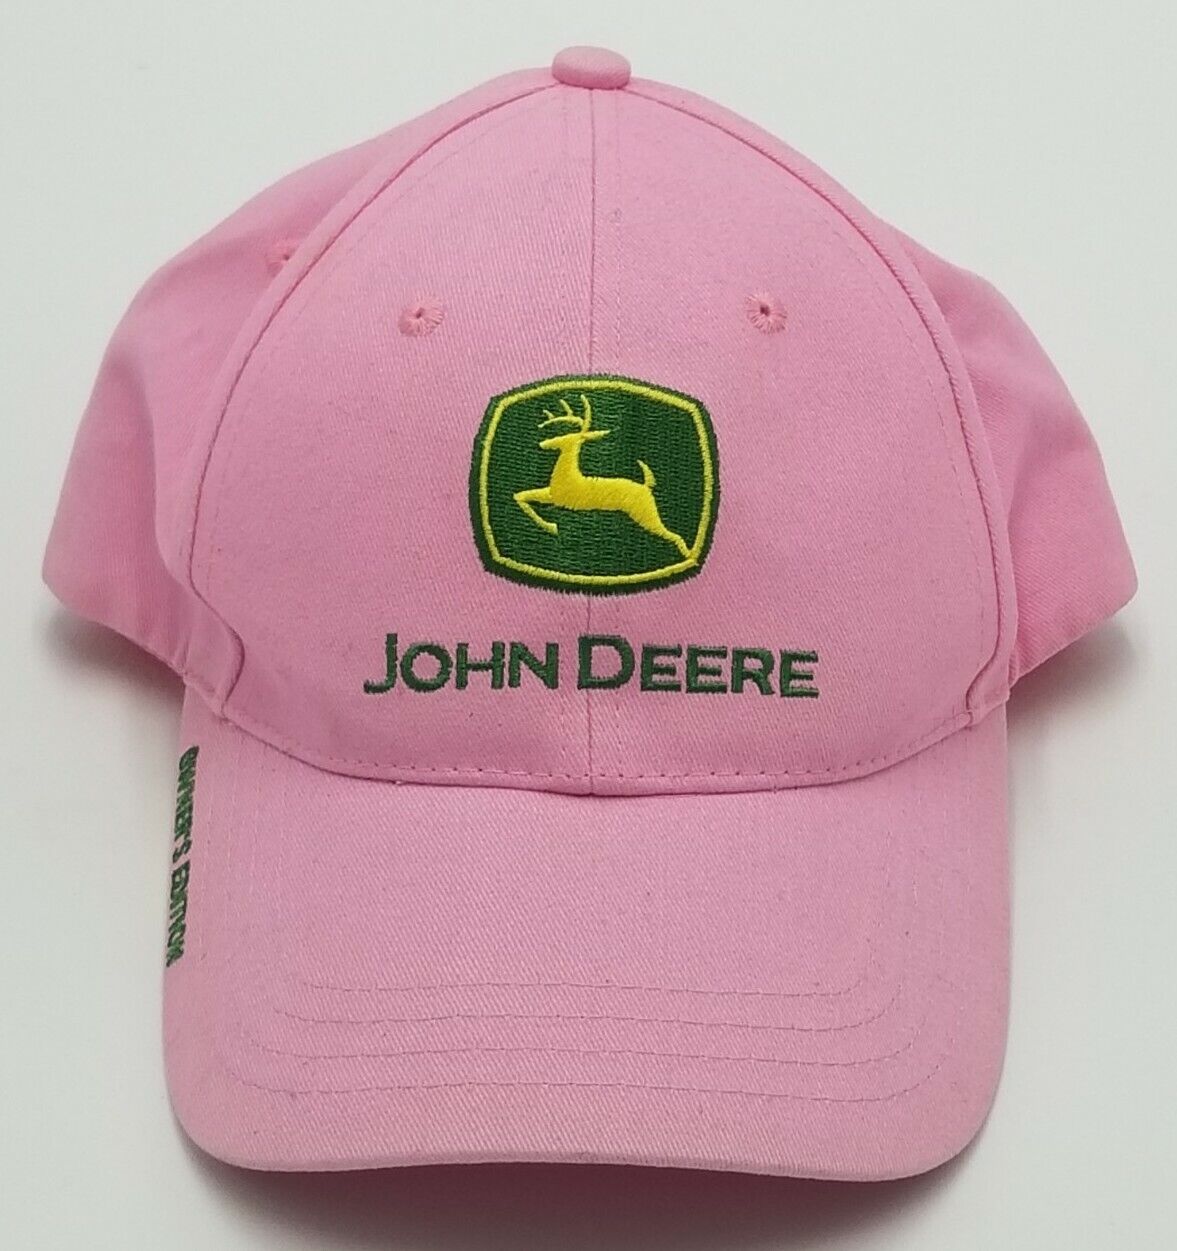 John Deere Ladies Cap Hat Pink Embroidered RN 114640 100% Cotton Owners Edition